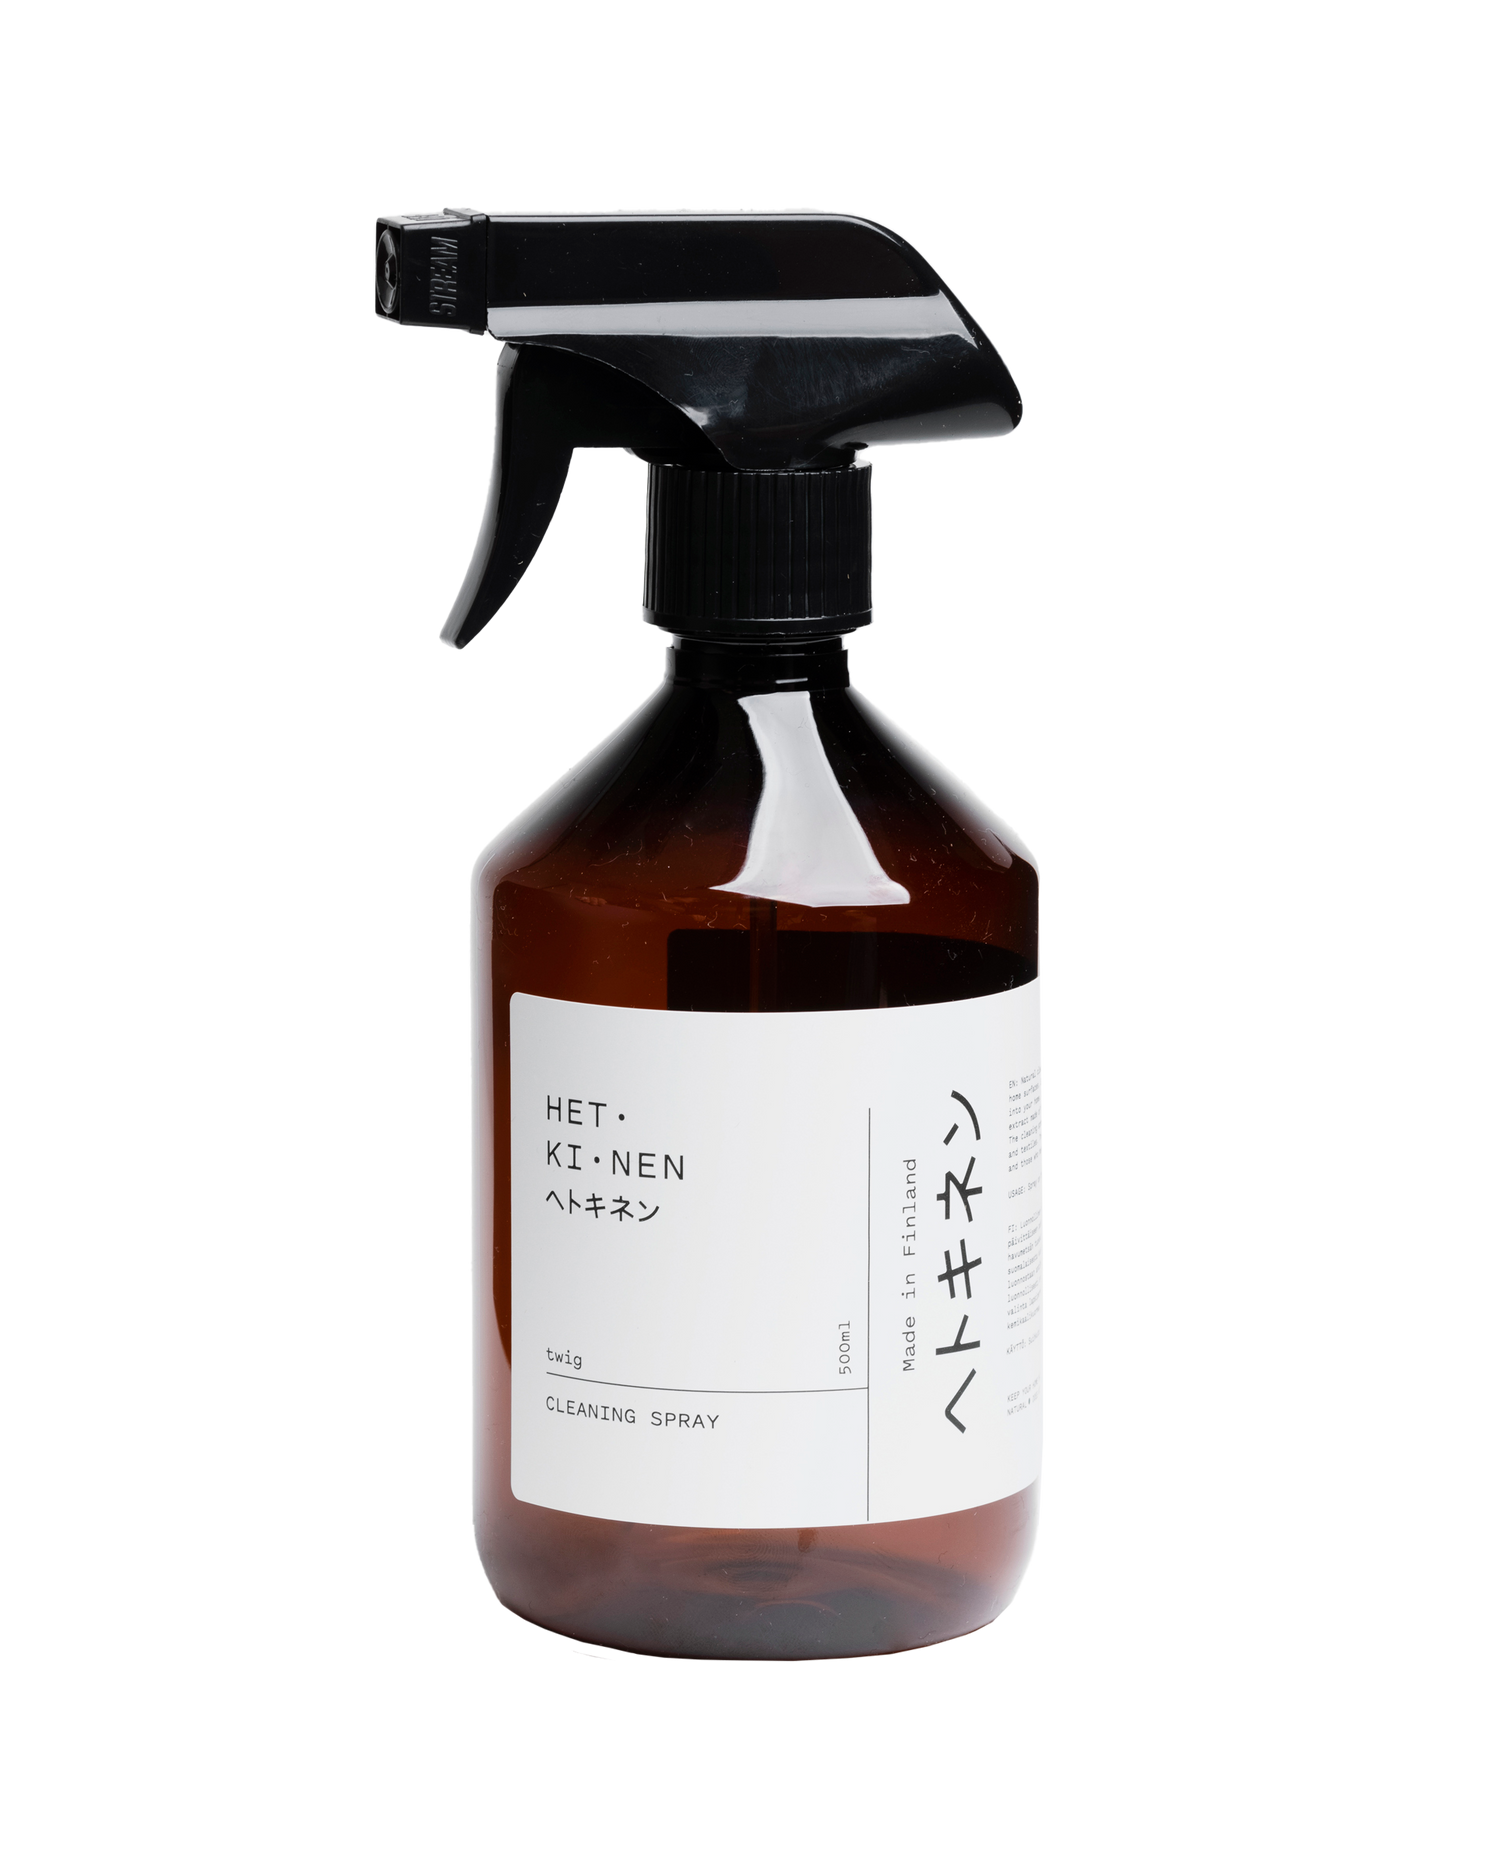 TWIG Natural cleaning spray